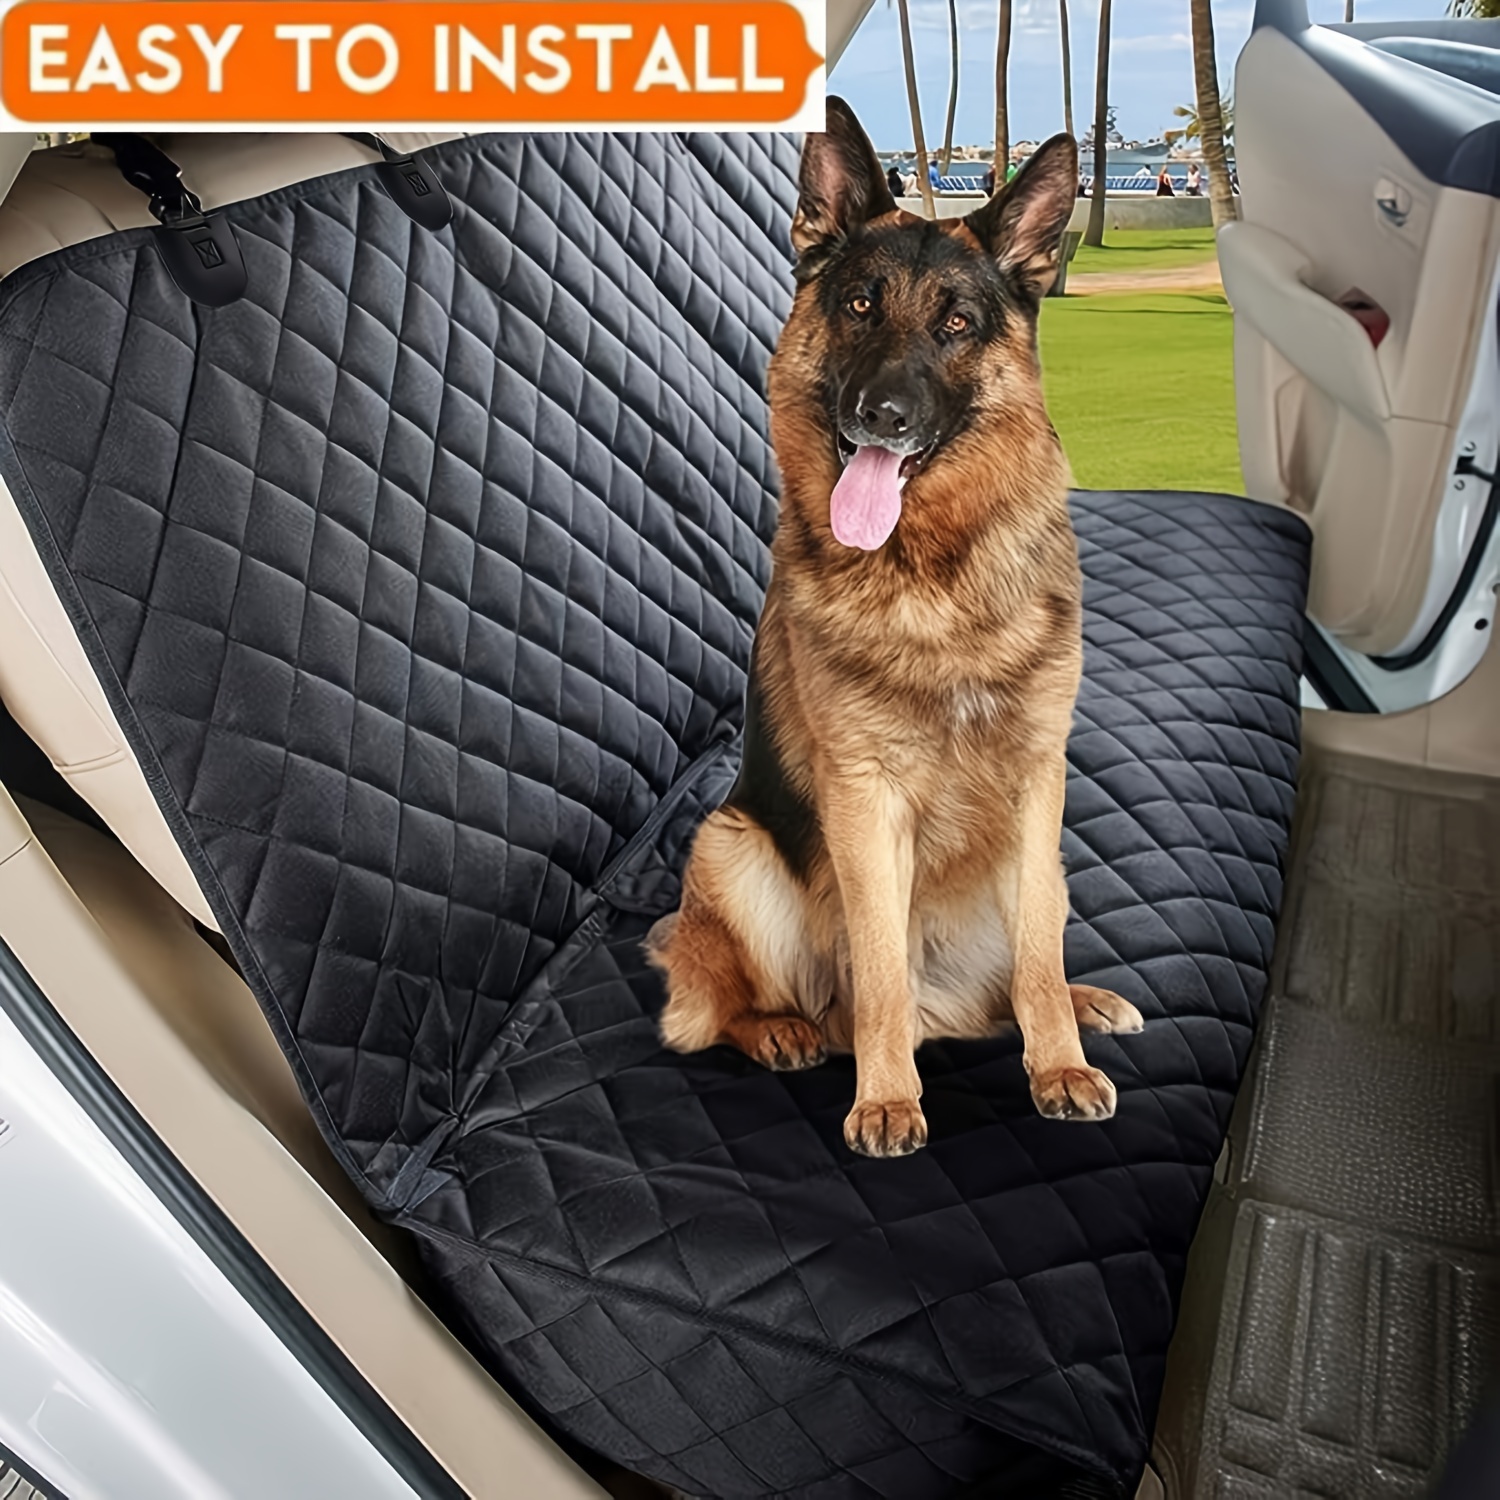 

Waterproof Dog Car Seat Cover - Fit For Trucks & Suvs, Pet Protection Bench Protector, Black Car Seat Cover For Dogs Dog Seat Cover For Back Seat